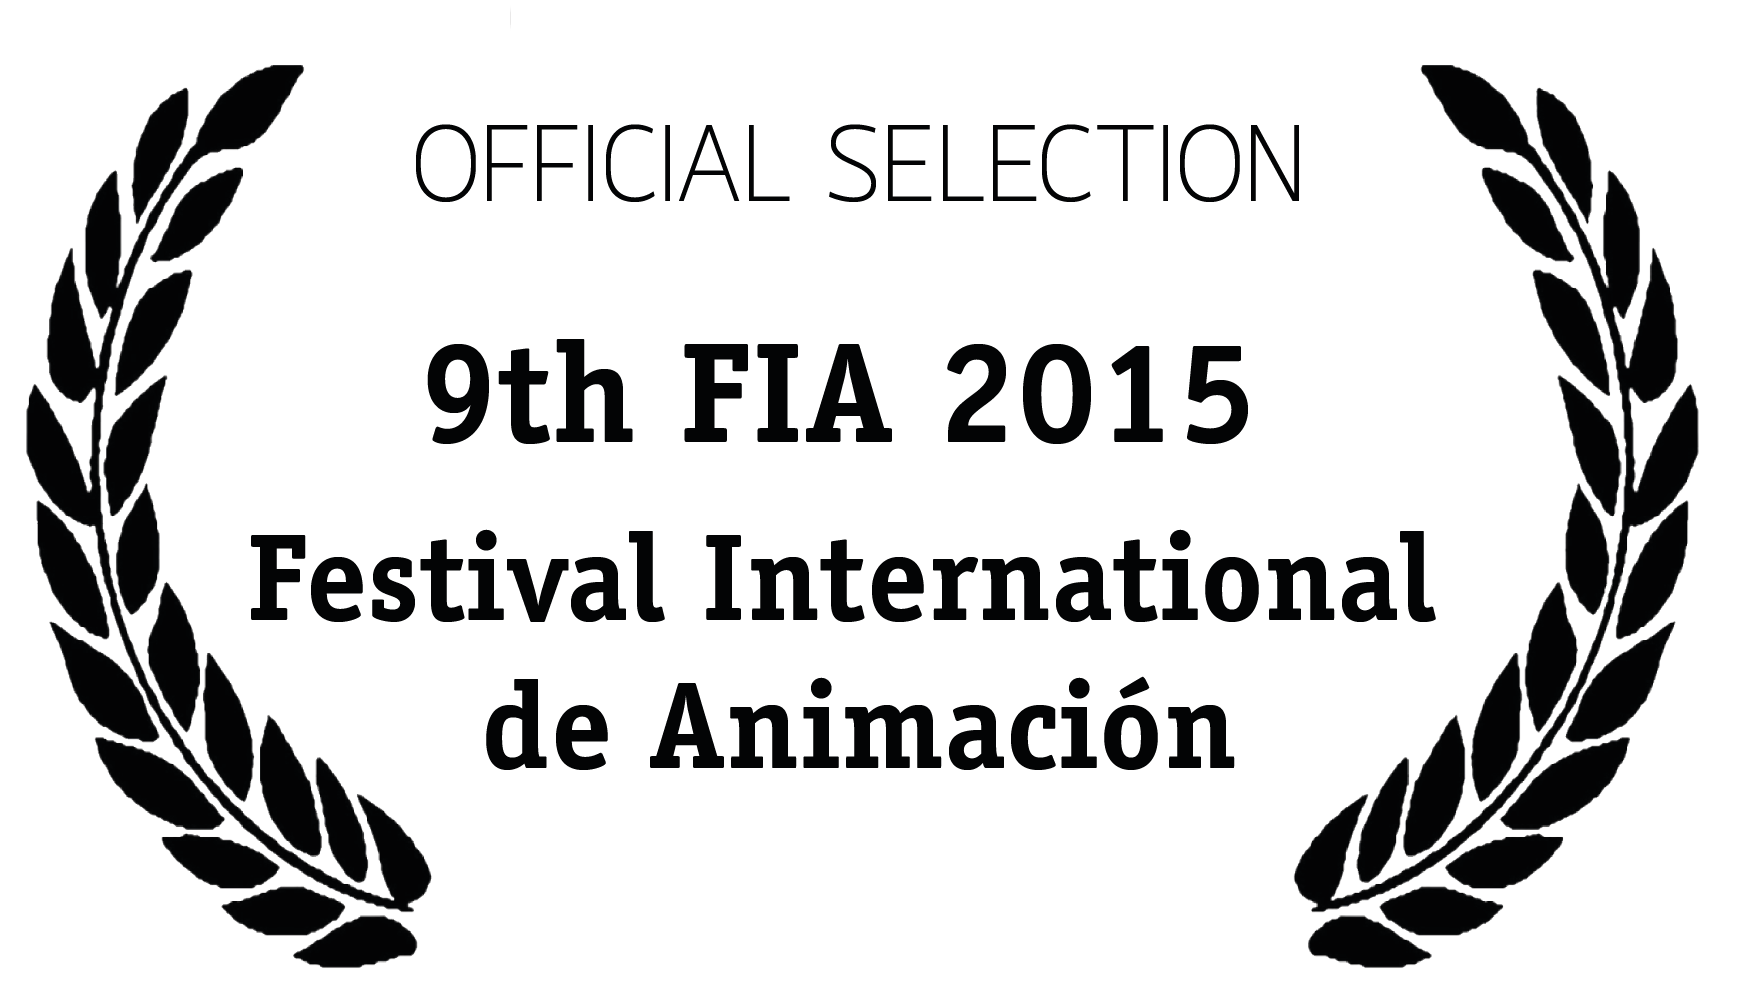 Official selection: FIA 2015